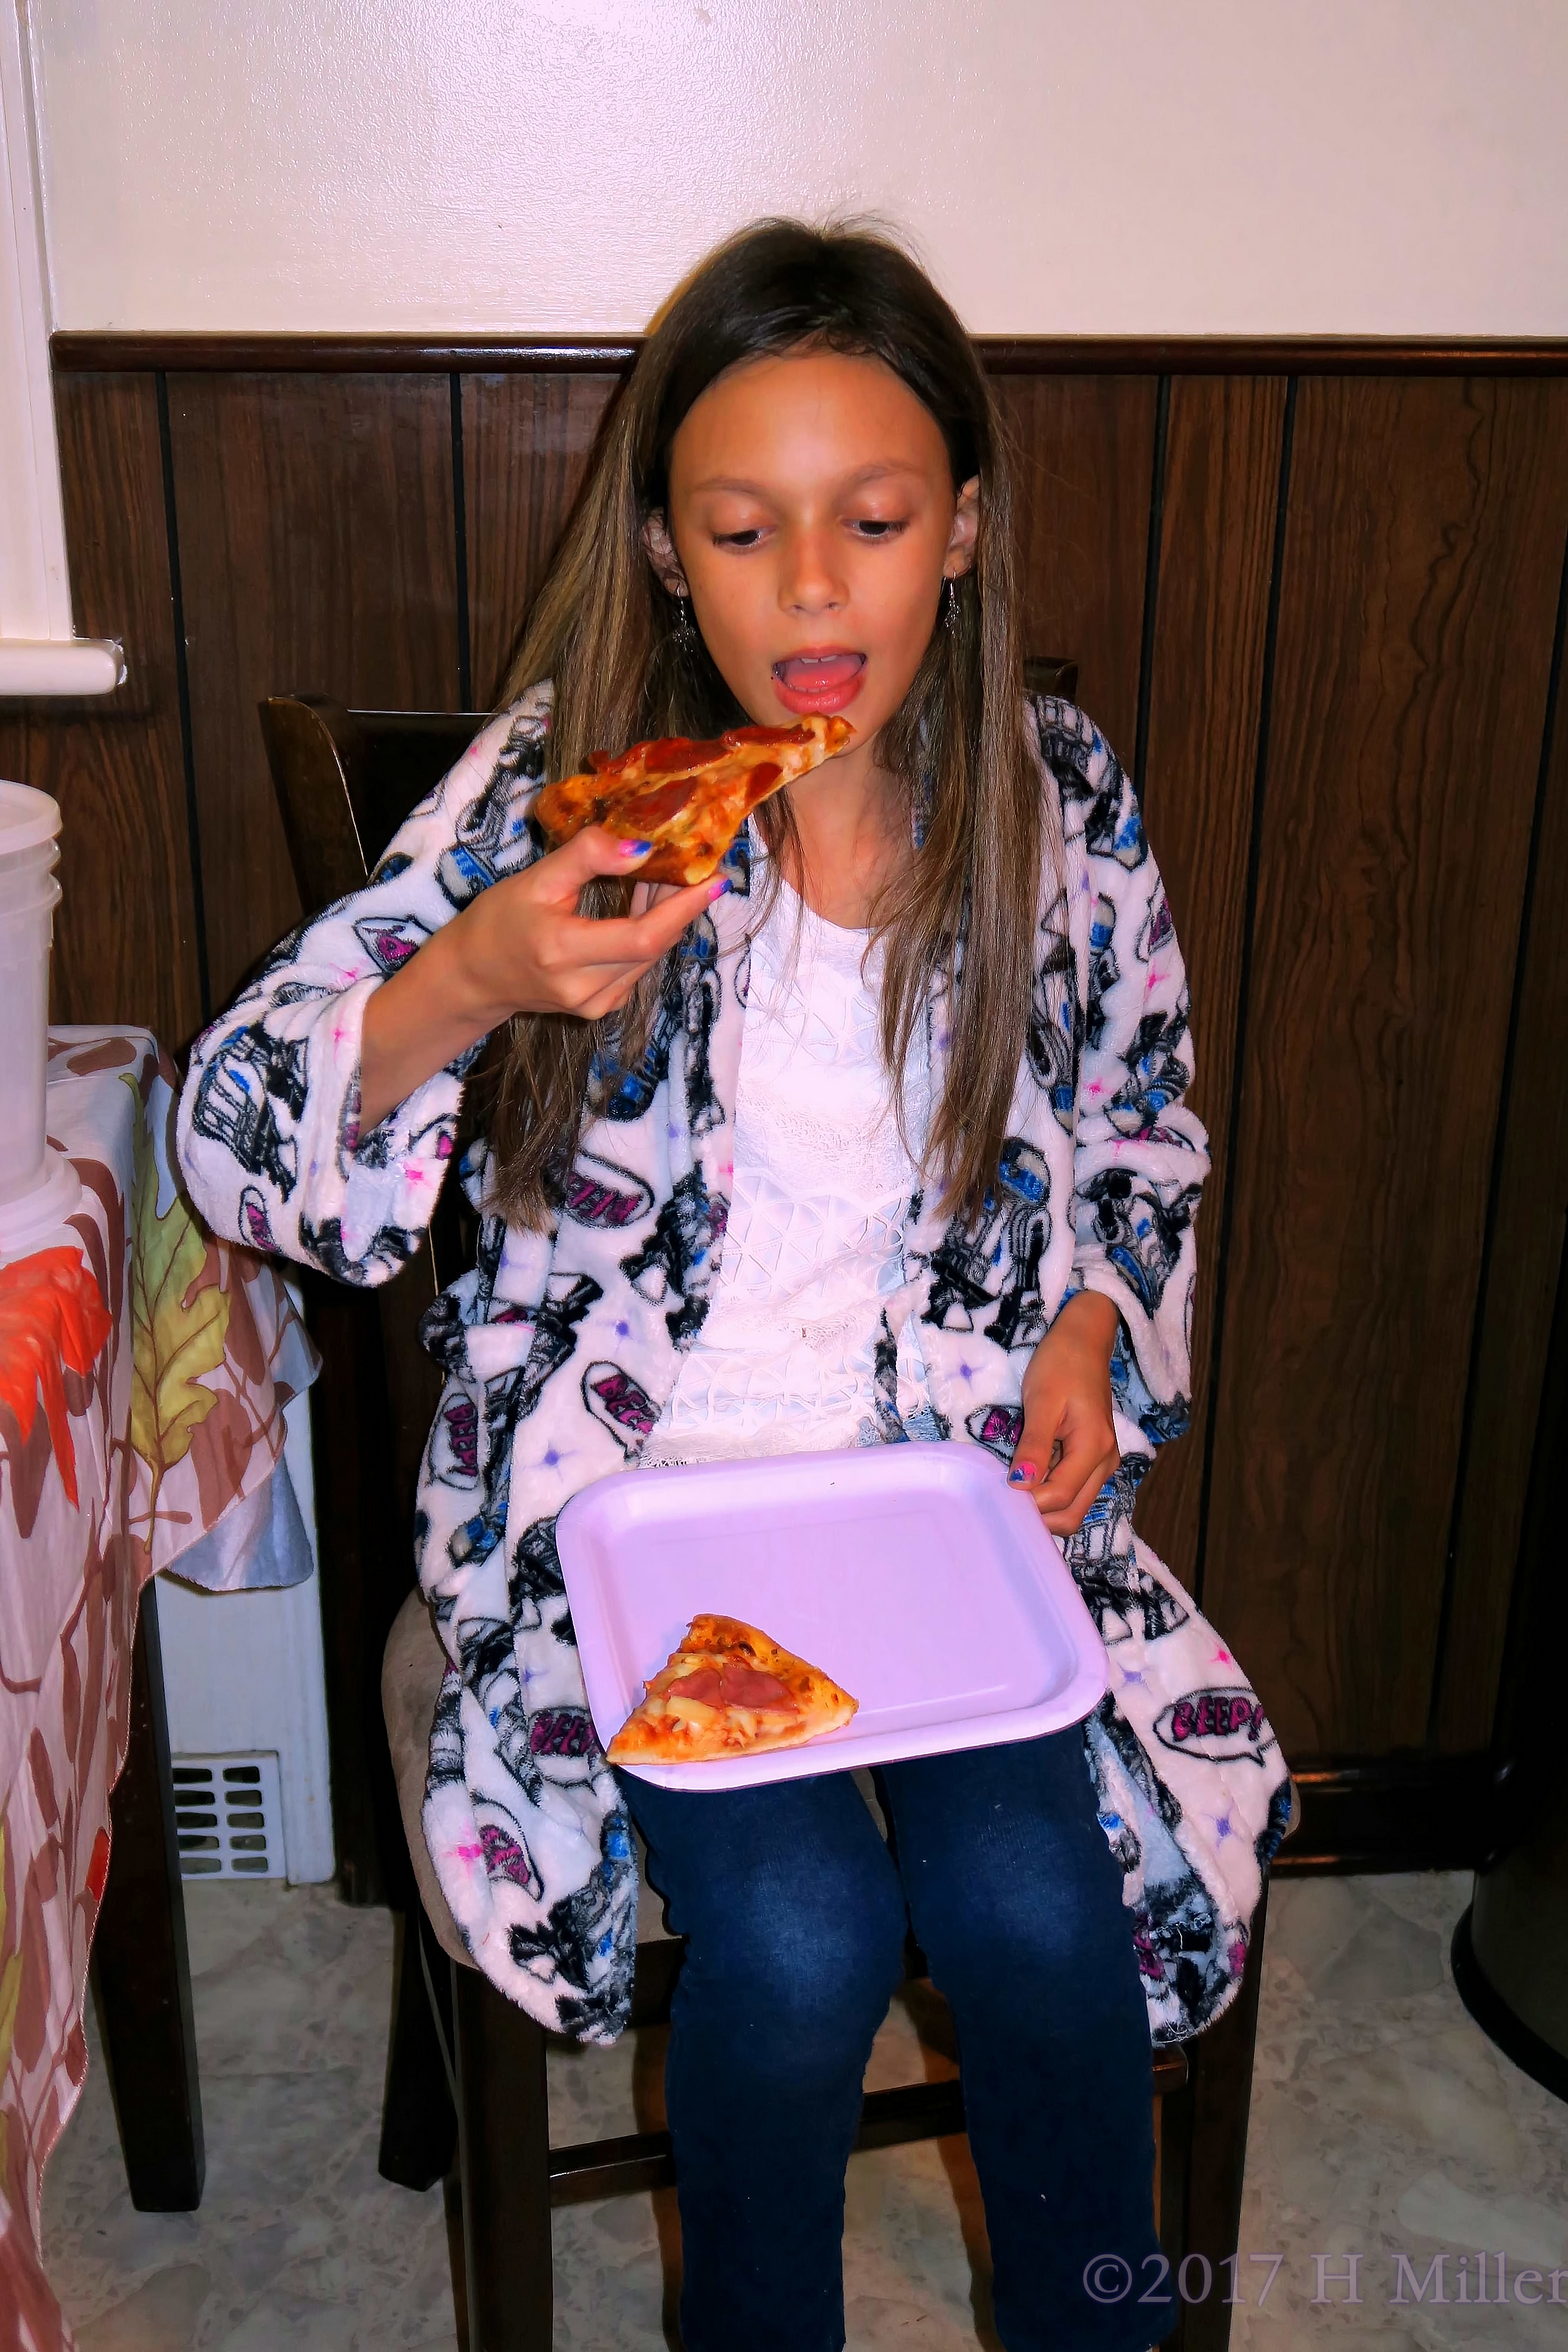 Pizza Is Super Delicious At The Spa For Girls! 